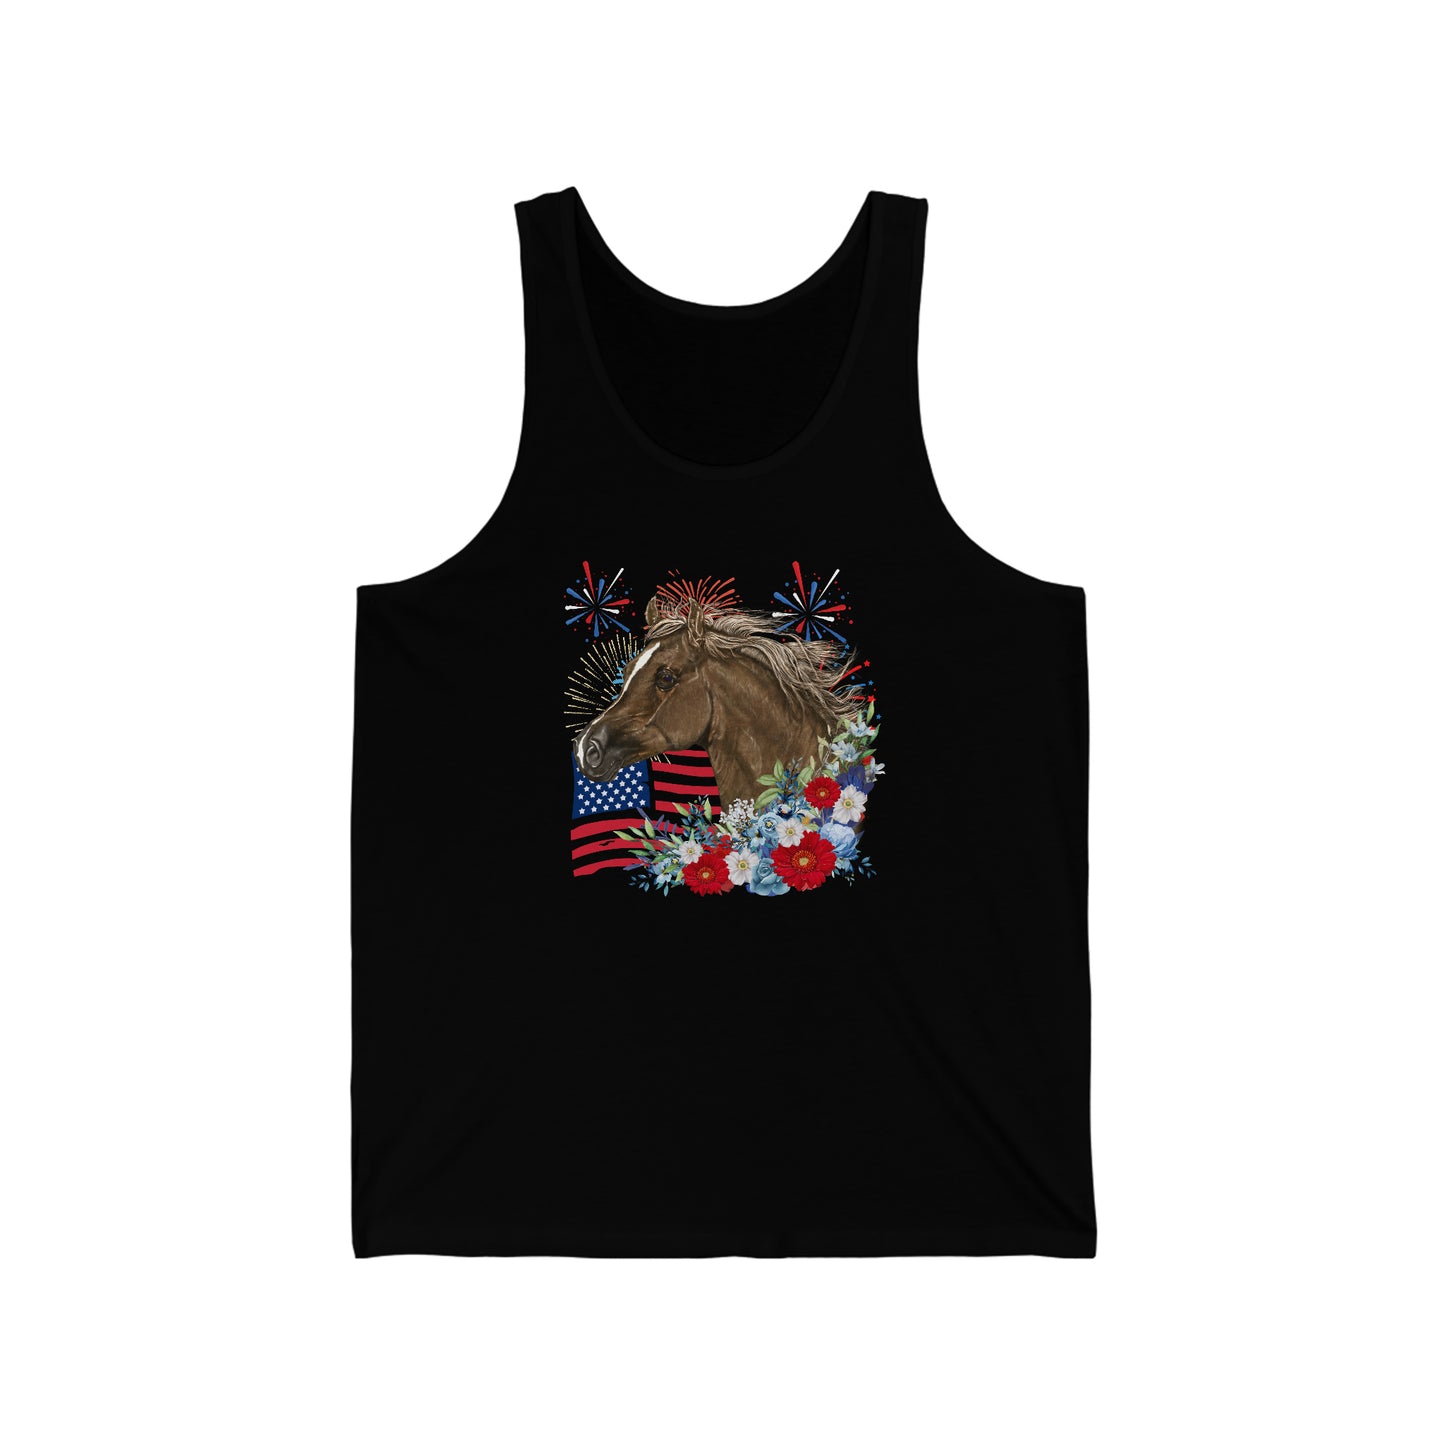 Patriotic Horse Tank Top with American Flag and Fireworks Graphic